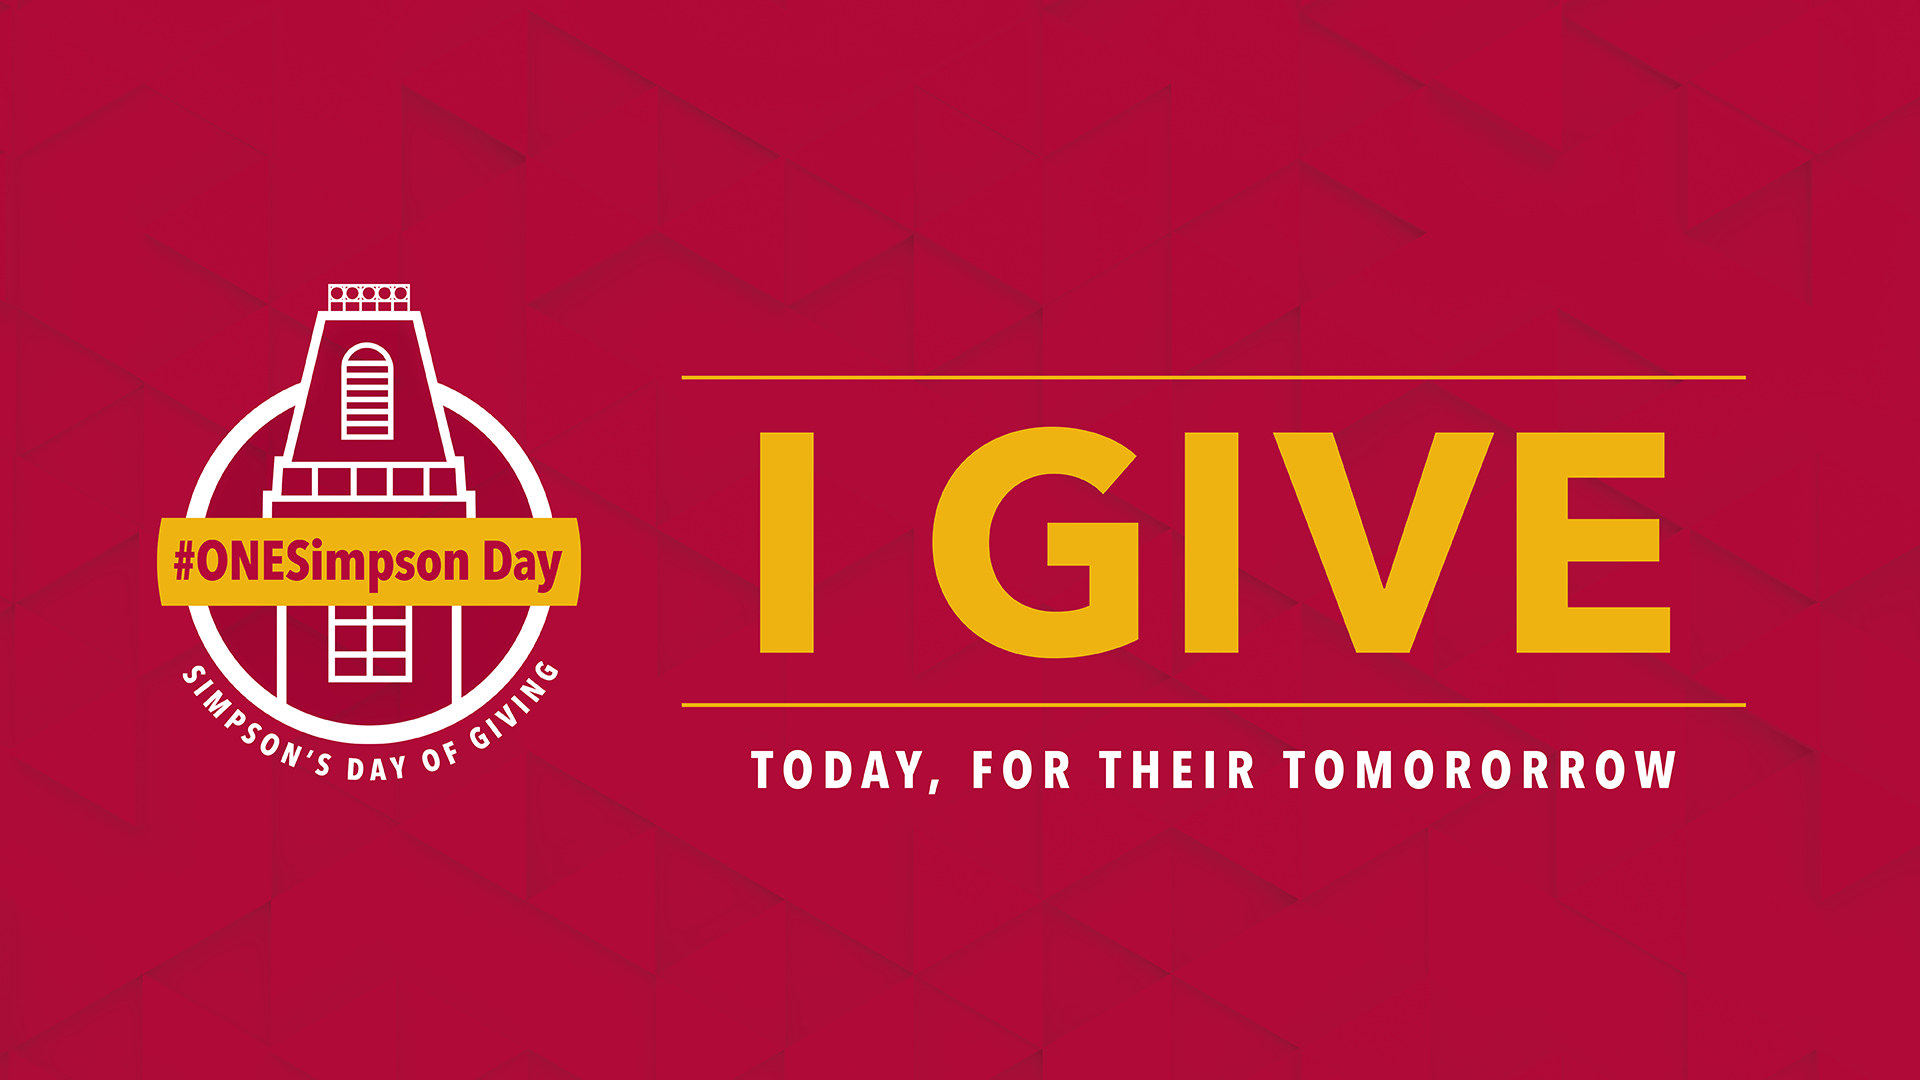 #ONESimpson Day Graphic: I give today for their tomorrow